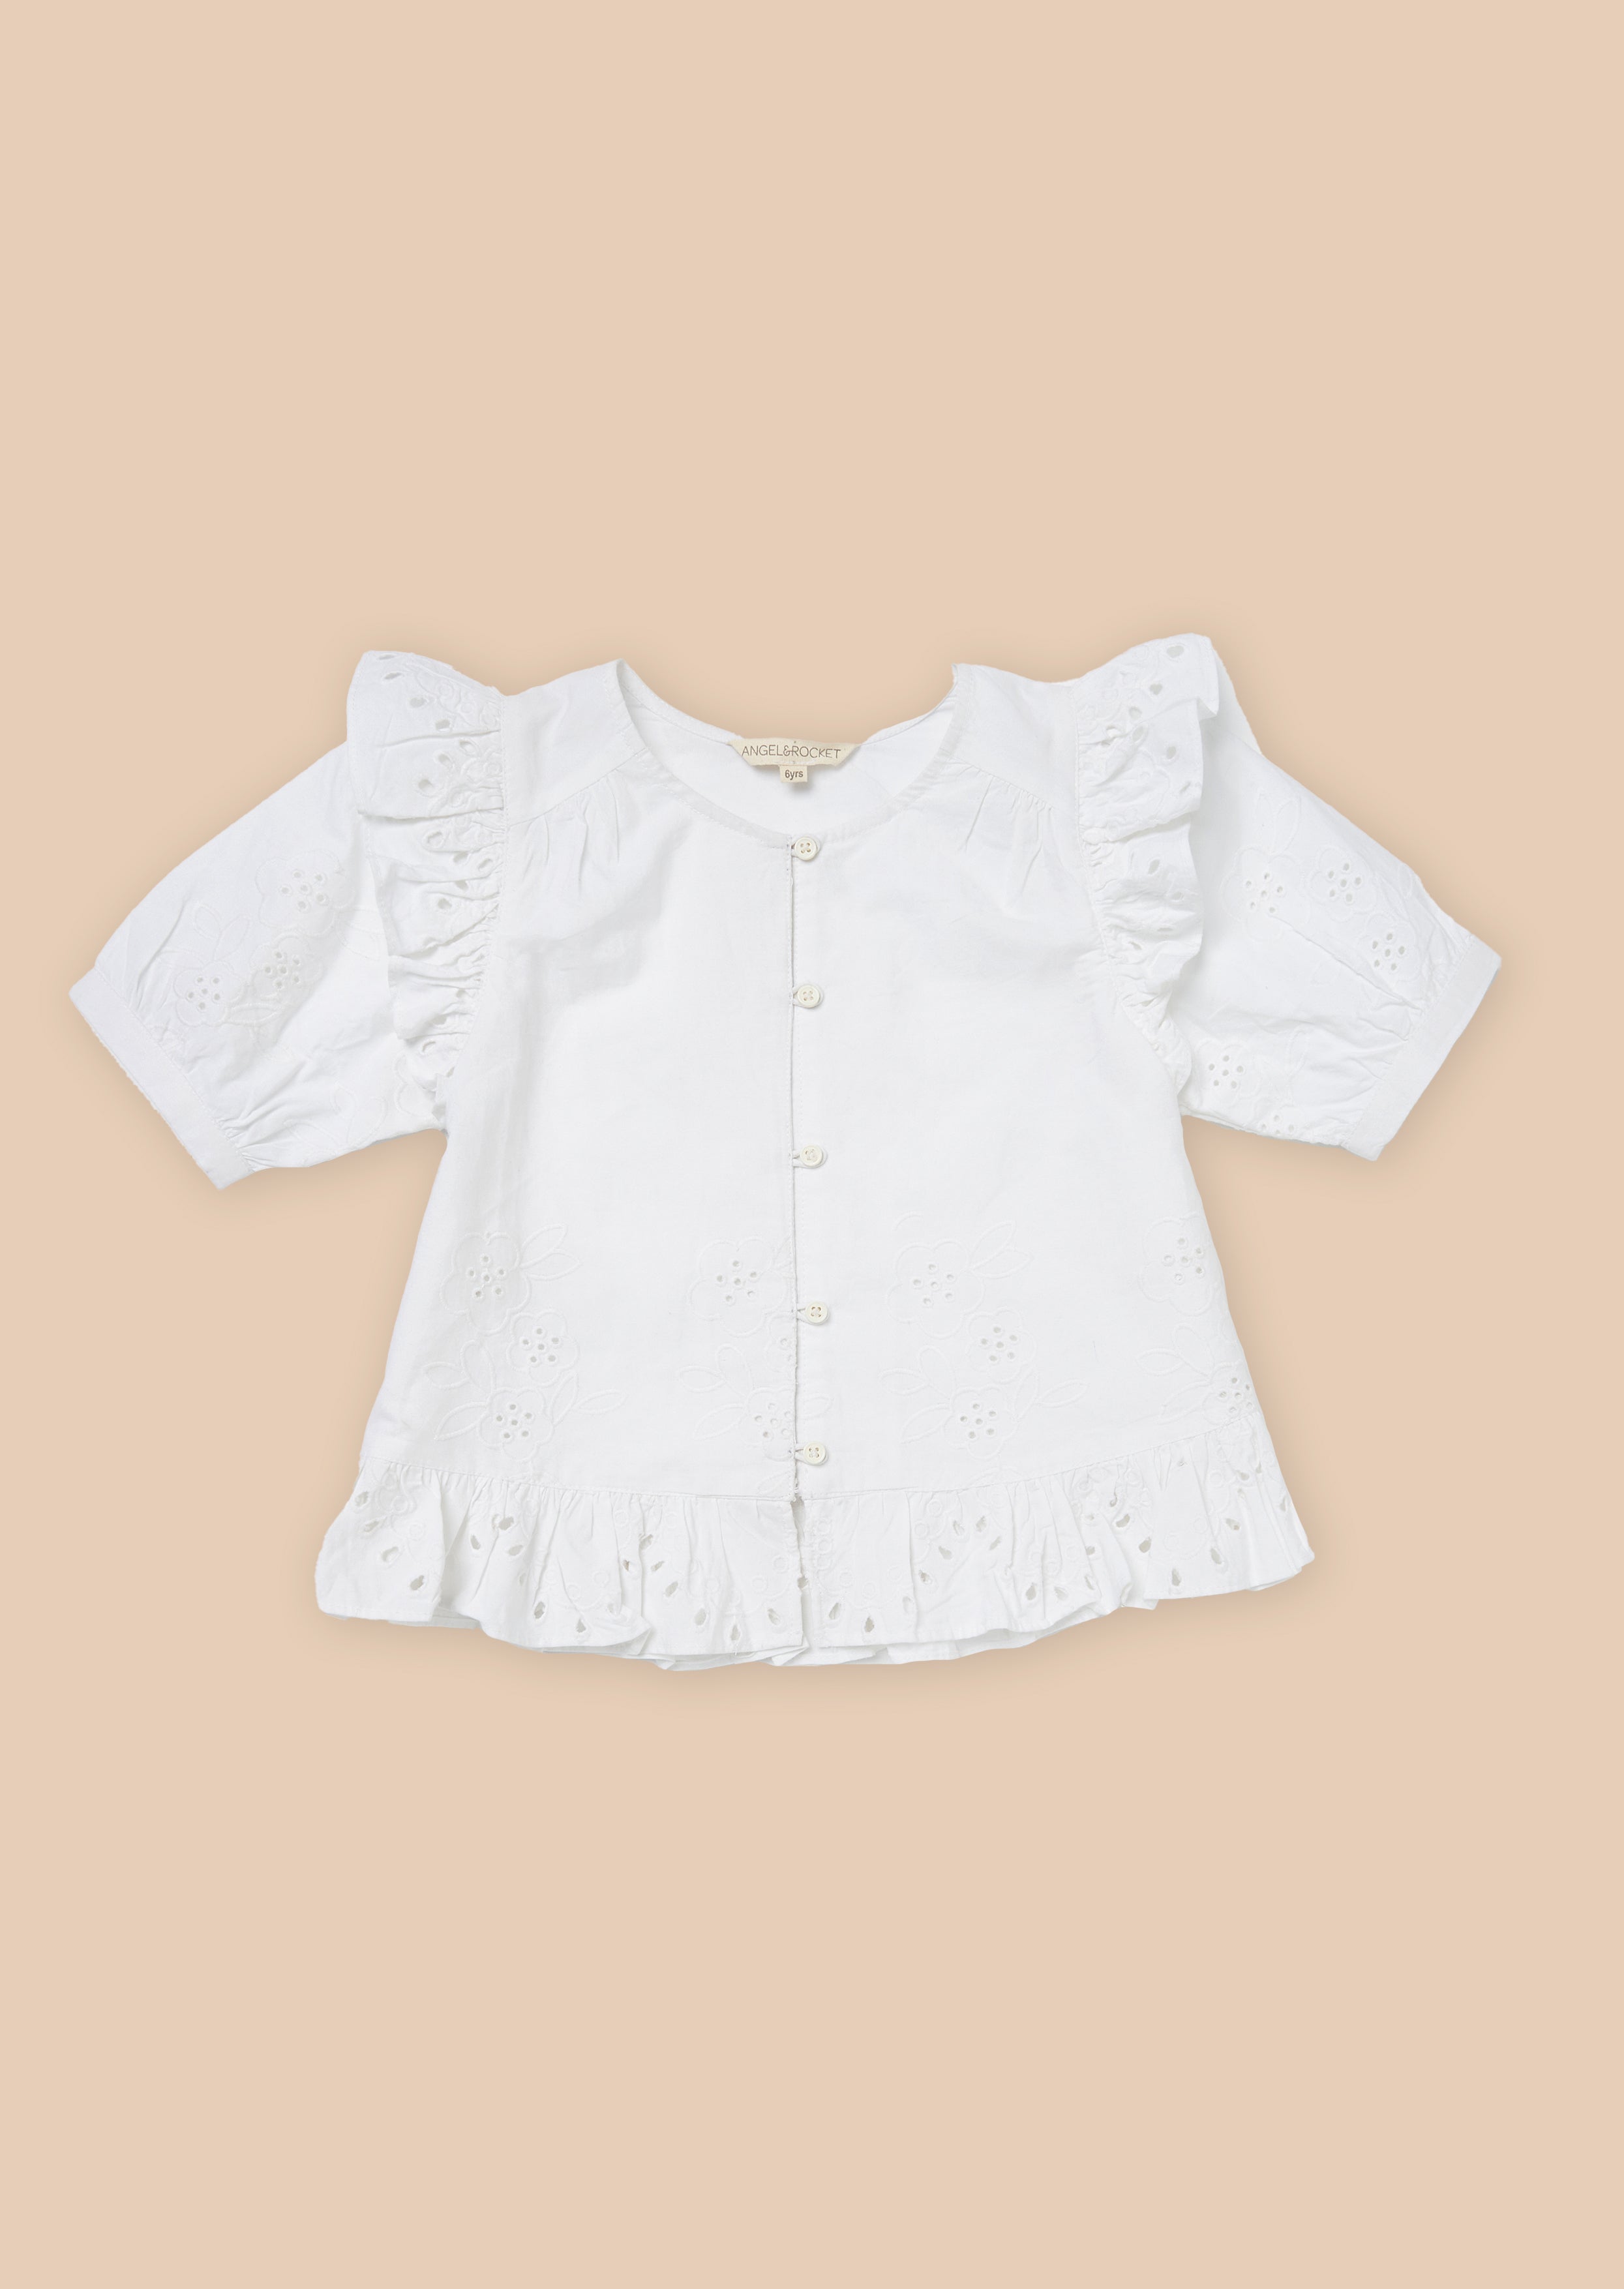 Girls Floral Embroidered White Top